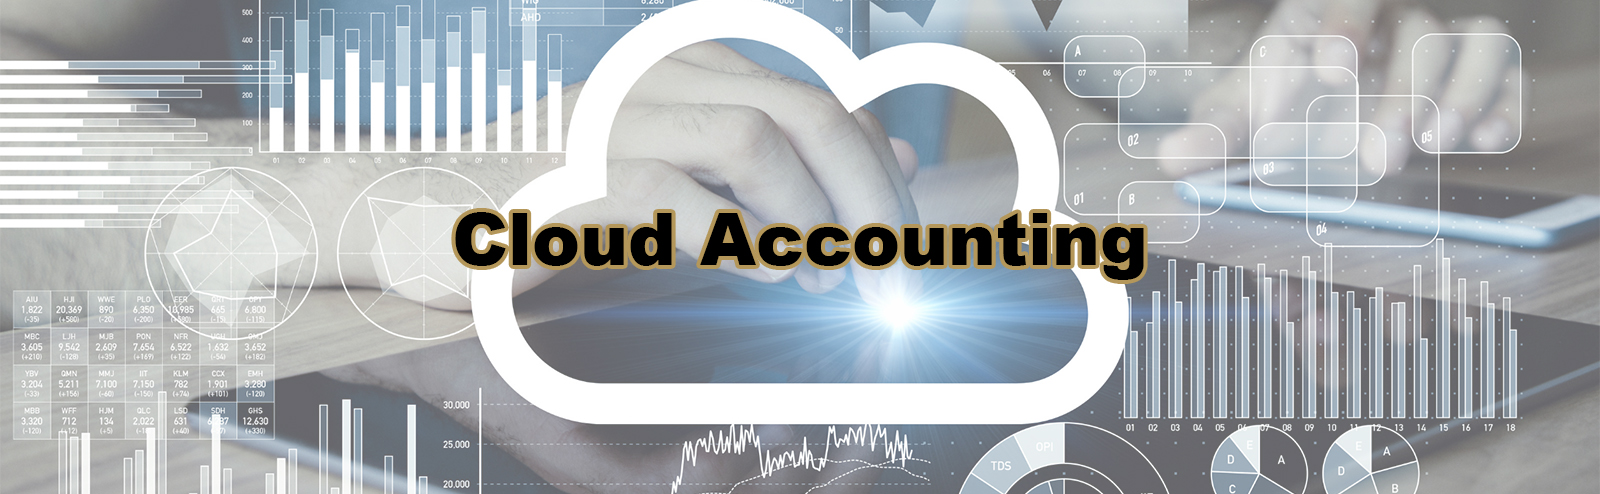 Cloud Accounting Banner